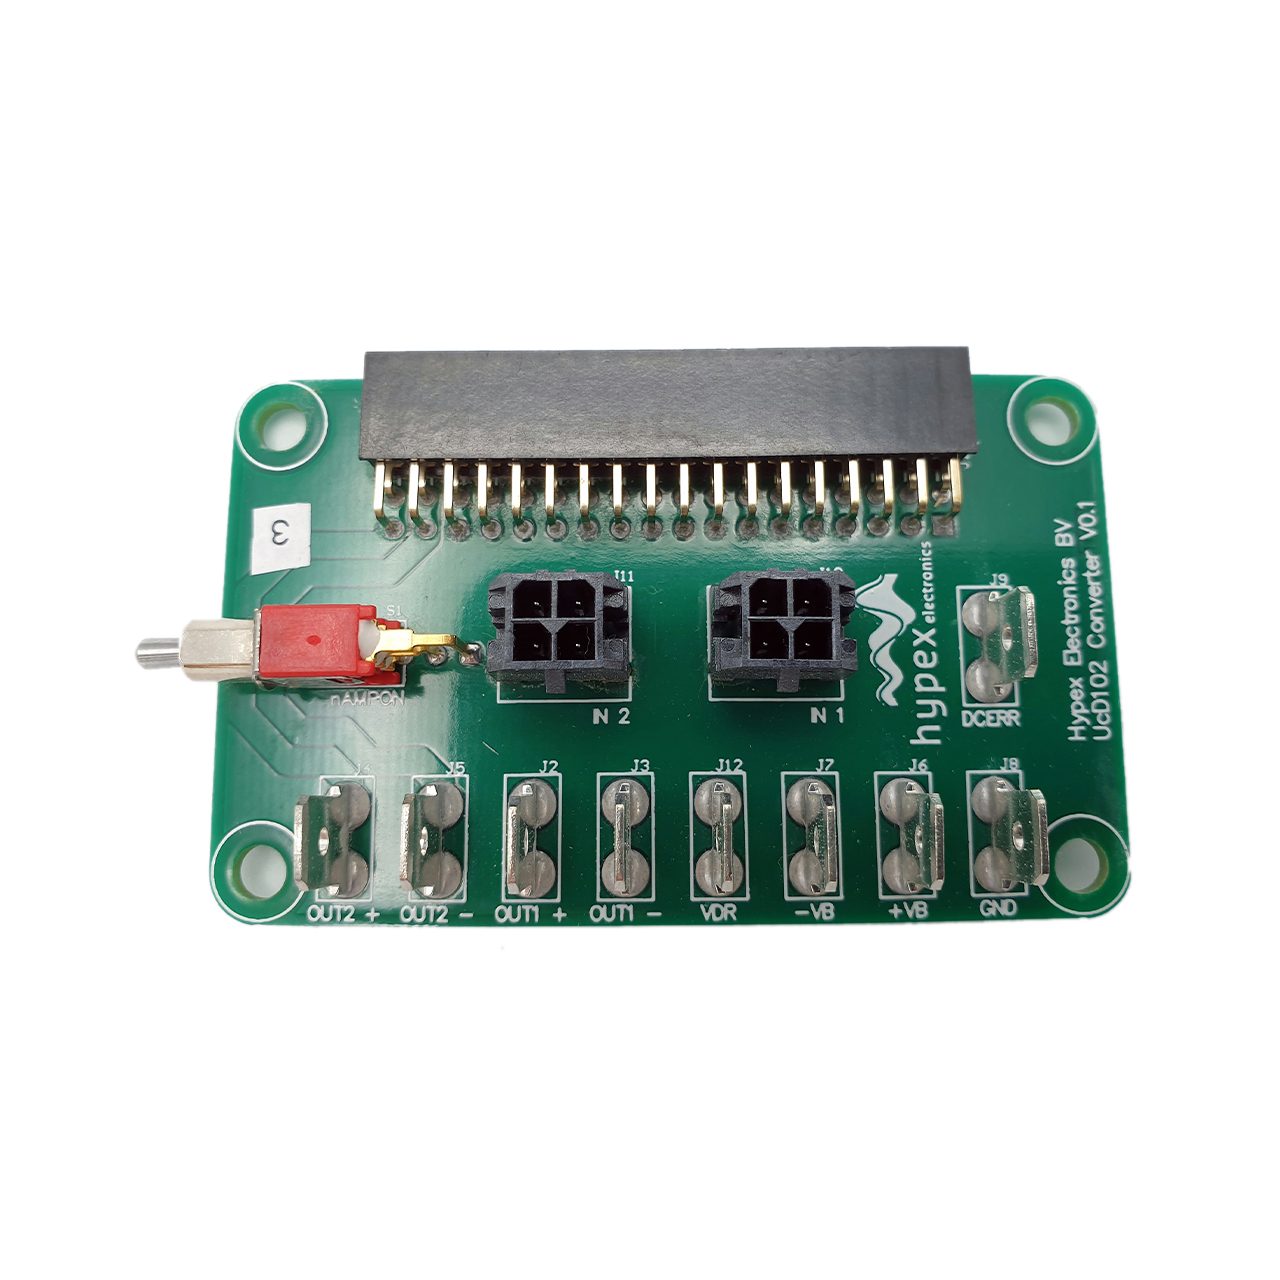 Hypex UcD™ 102 evaluation board